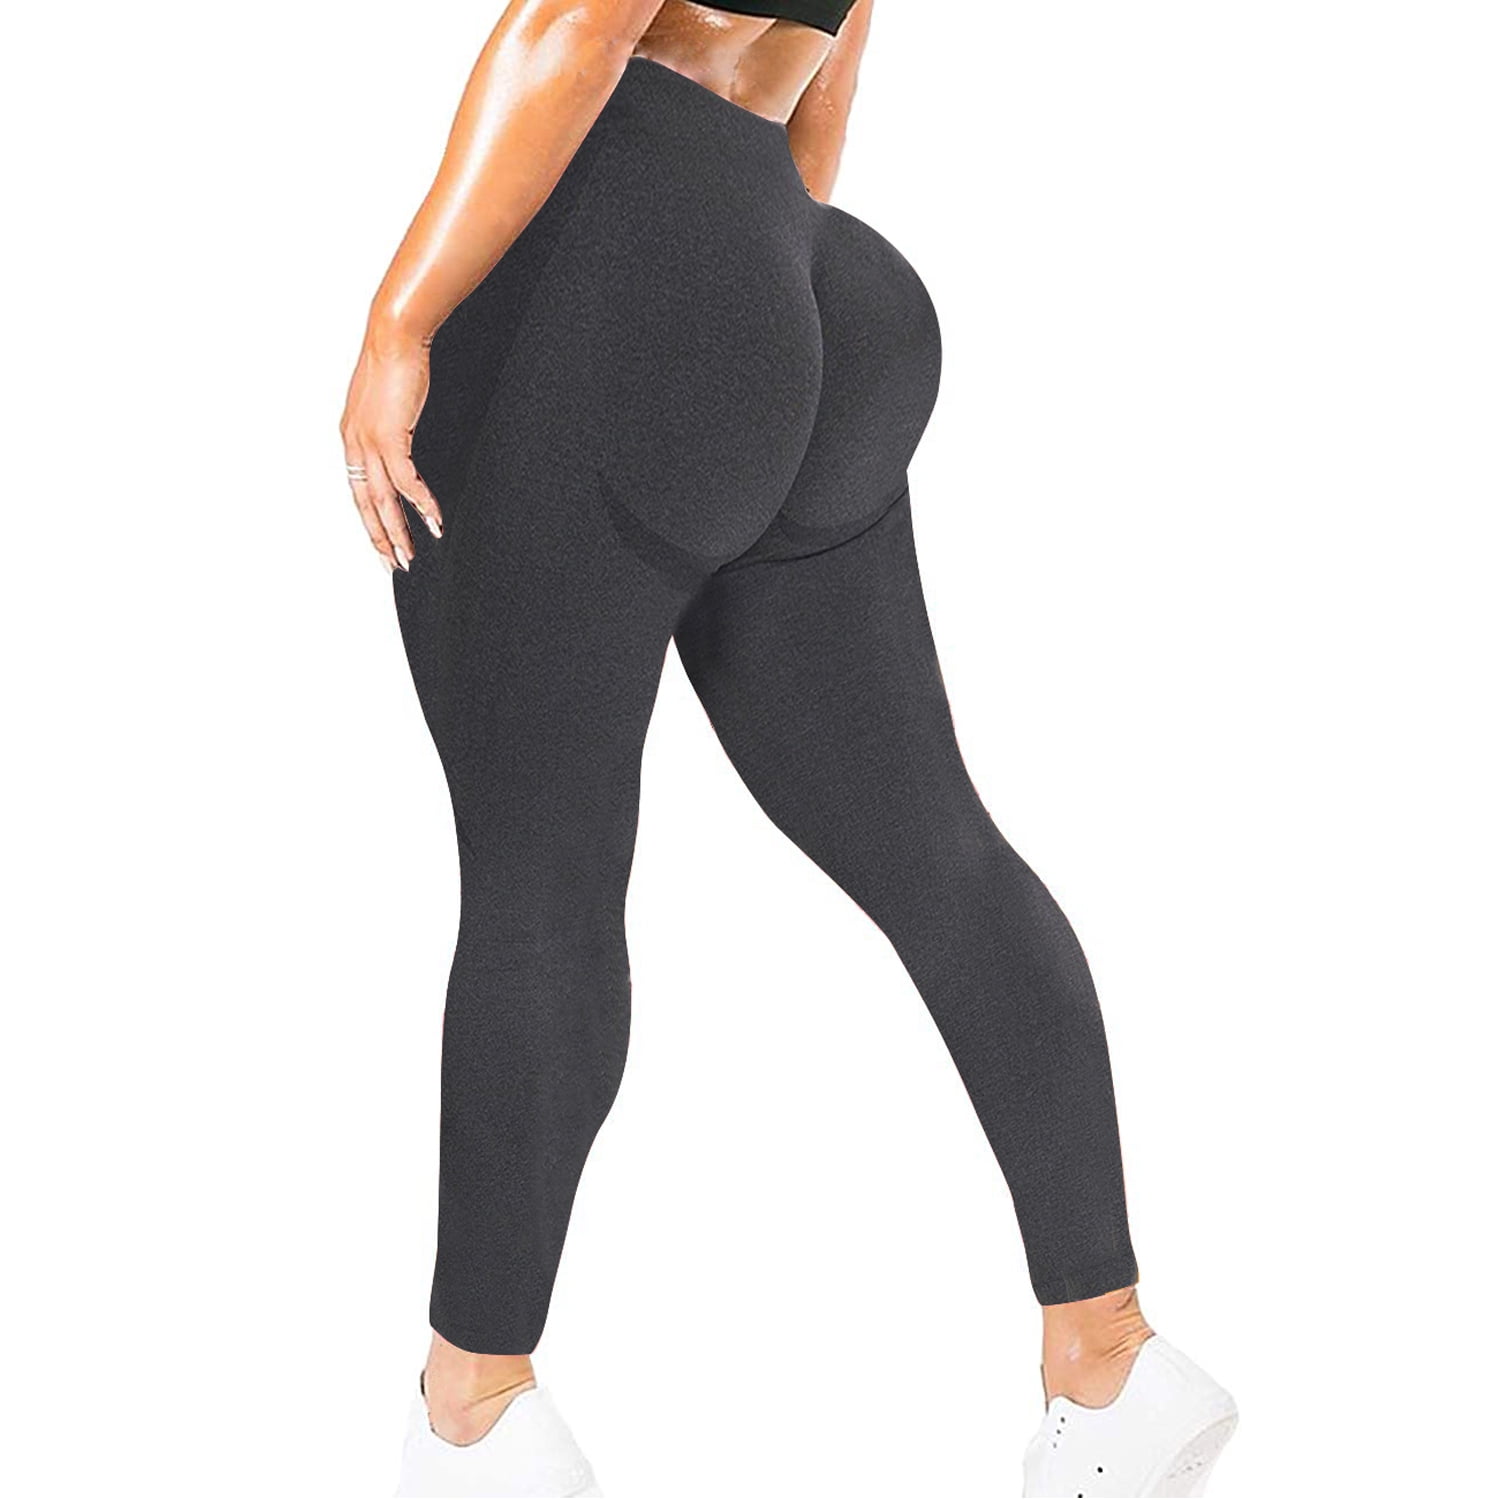 BlissClub Women Power Up Compression Leggings, Laminated Waistband, Spandex Printing for Glute Compression, Calf Shaping Seams, Two  Waist-Level Side Pockets